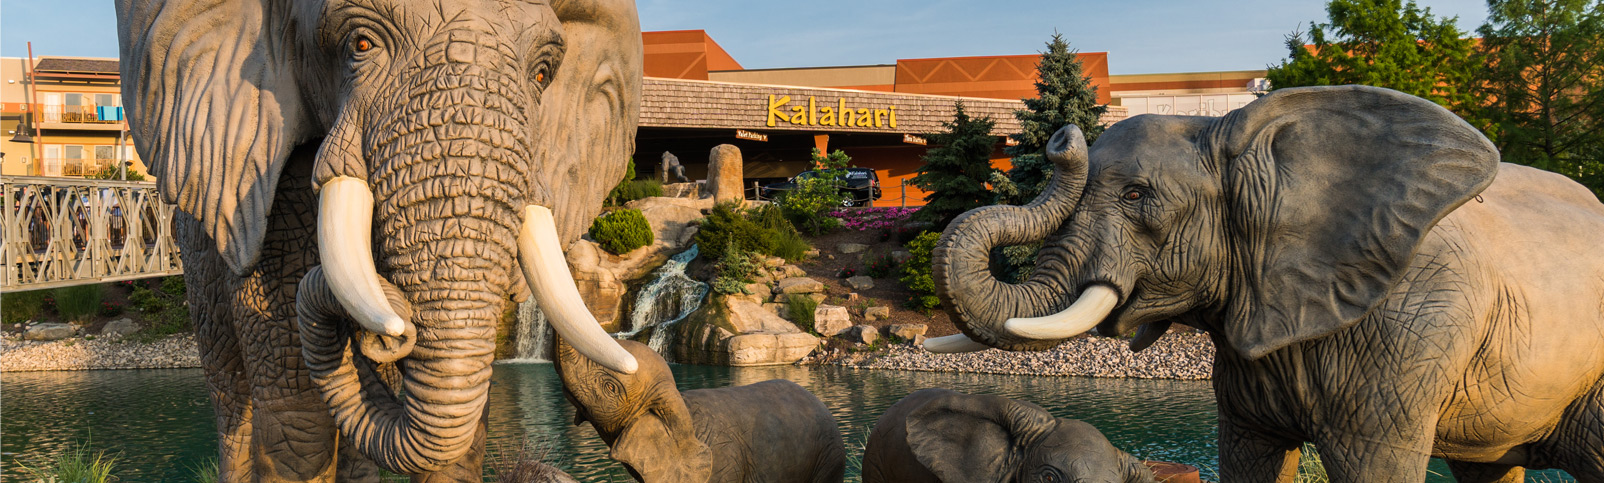 elephant structures in front of the Kalahari Resort in Sandusky, OH